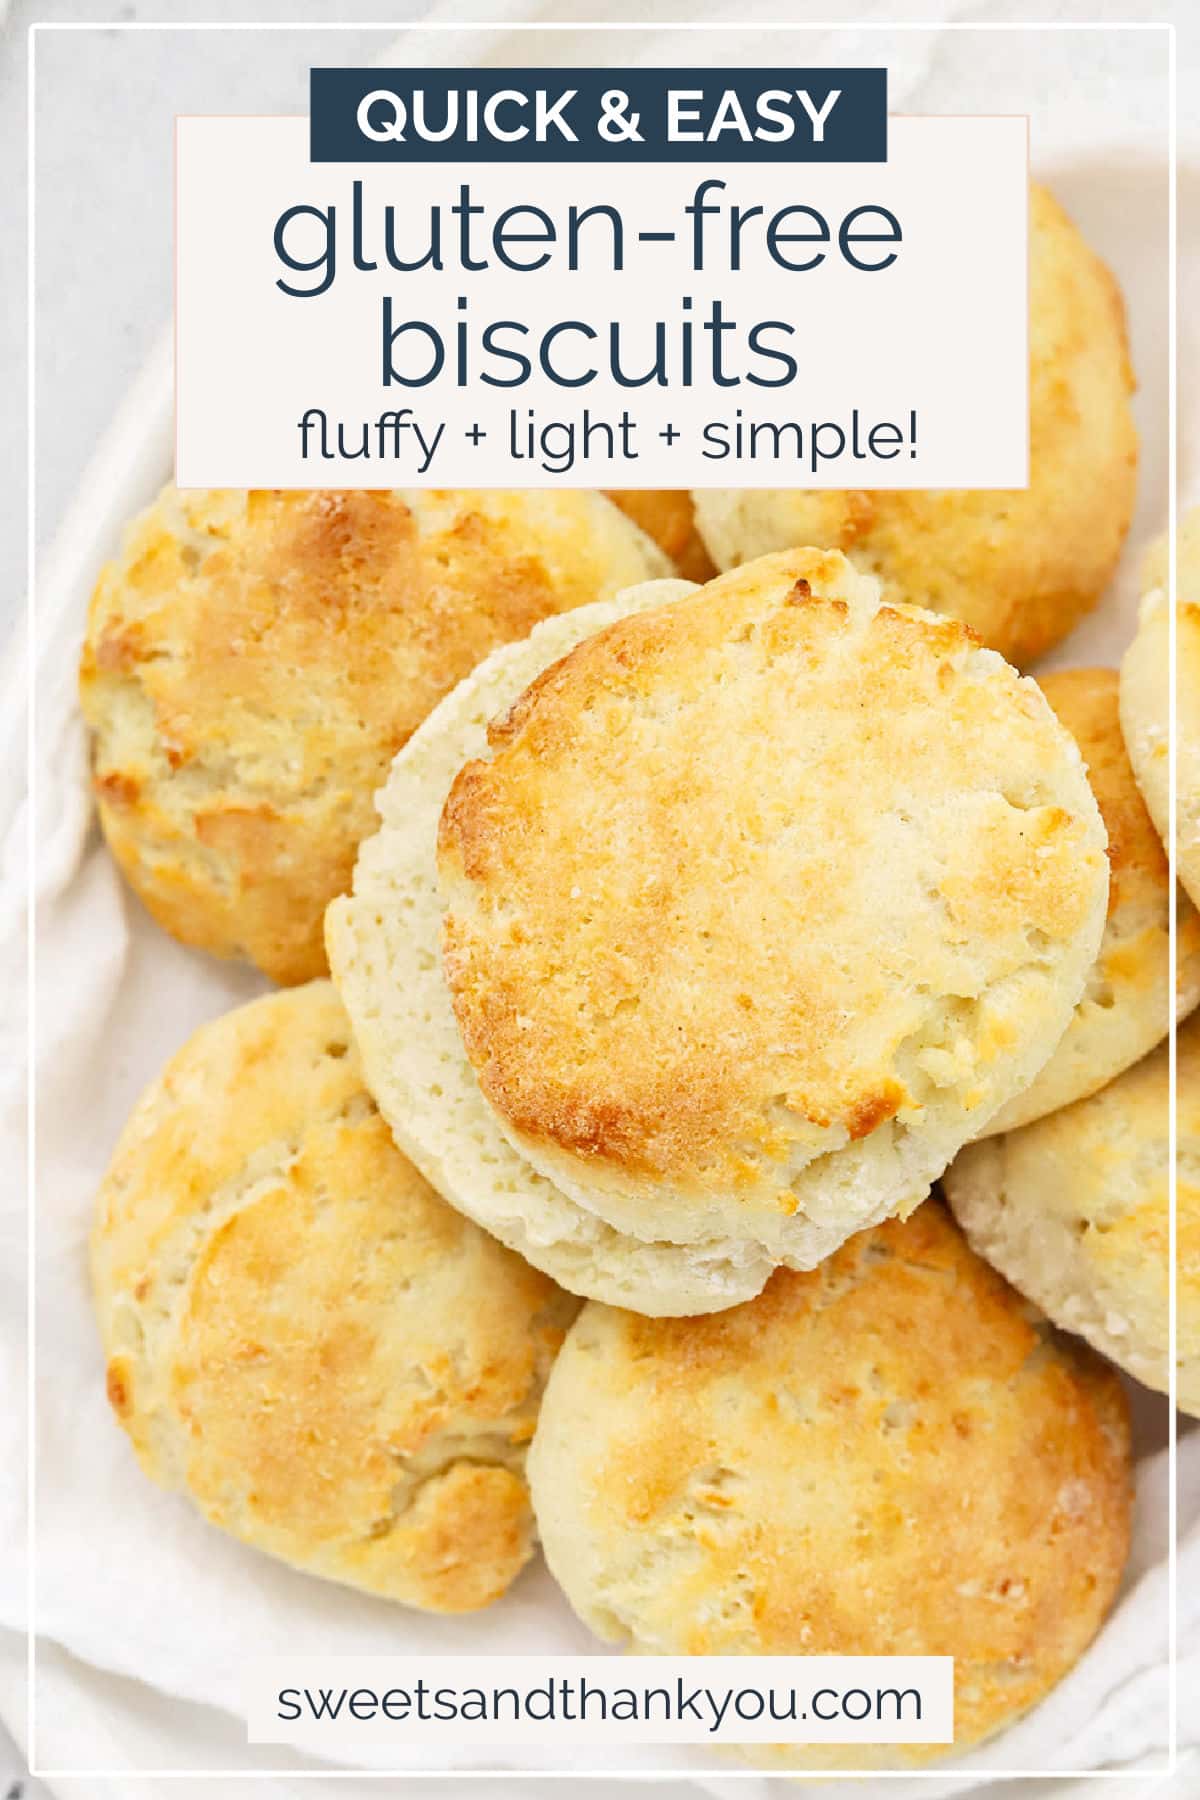 Quick & Easy Gluten-Free Biscuits - These 5-ingredient gluten-free biscuits are simple enough for beginners and are on the table in no time! // Yogurt Biscuits // Gluten Free Drop Biscuits // Easy Gluten Free Biscuit Recipe // gluten free biscuits recipe / gluten free biscuit recipe / easy biscuits / 5 ingredient gluten free biscuits / gluten free biscuits with yogurt / gluten free biscuits and gravy / gluten free brunch recipe / gluten free breakfast